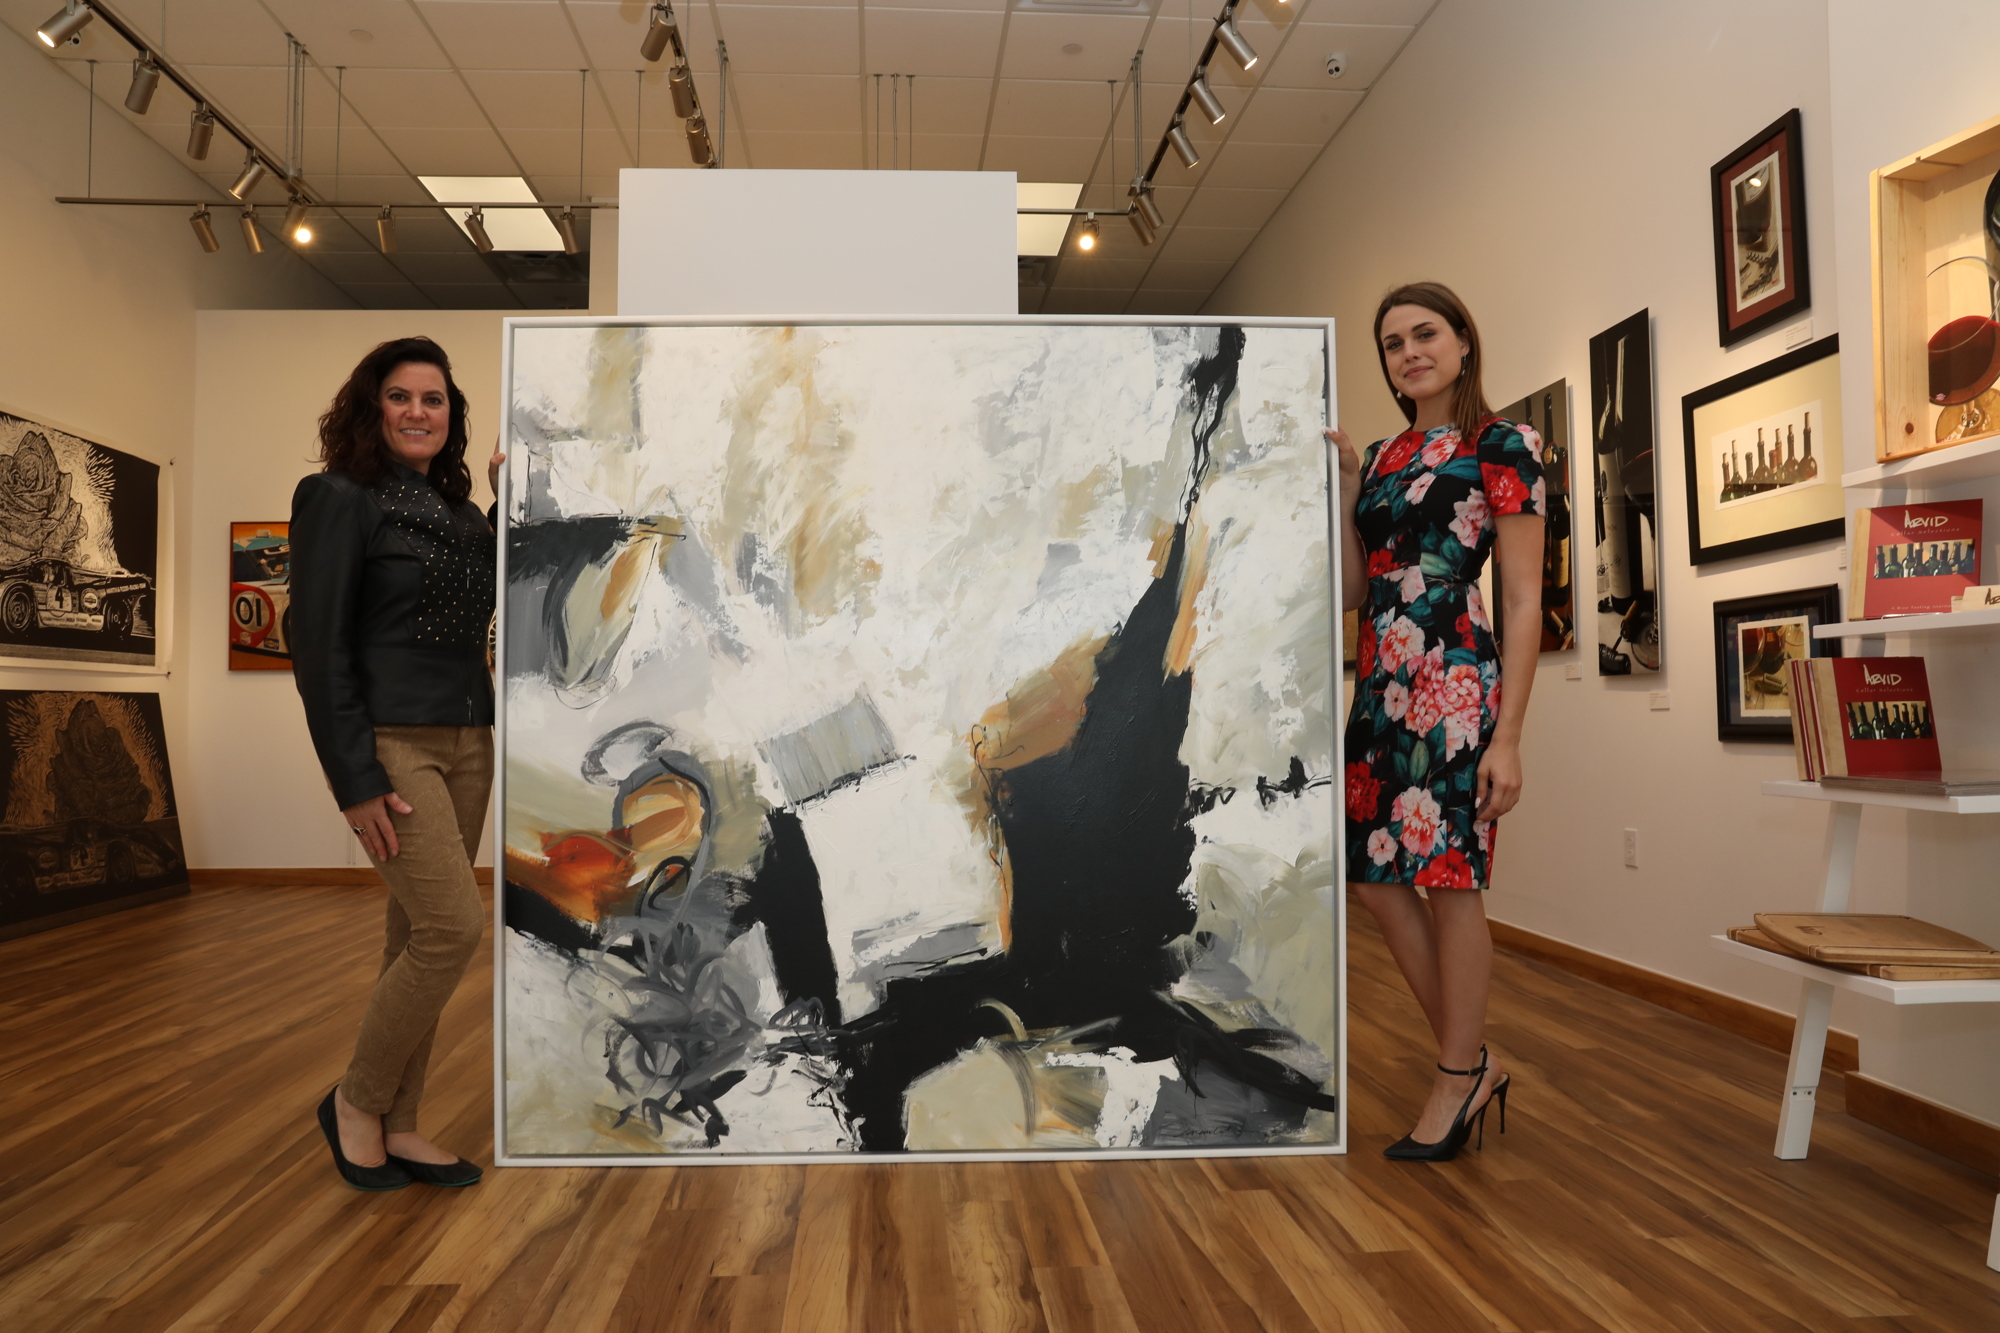 NASCAR Foundation Executive Director Nichole Krieger  and Gallery 500 Manager Jessica Kennedy show artwork purchased by Chapman Root during the “Art of Speed” exhibition. Courtesy photo